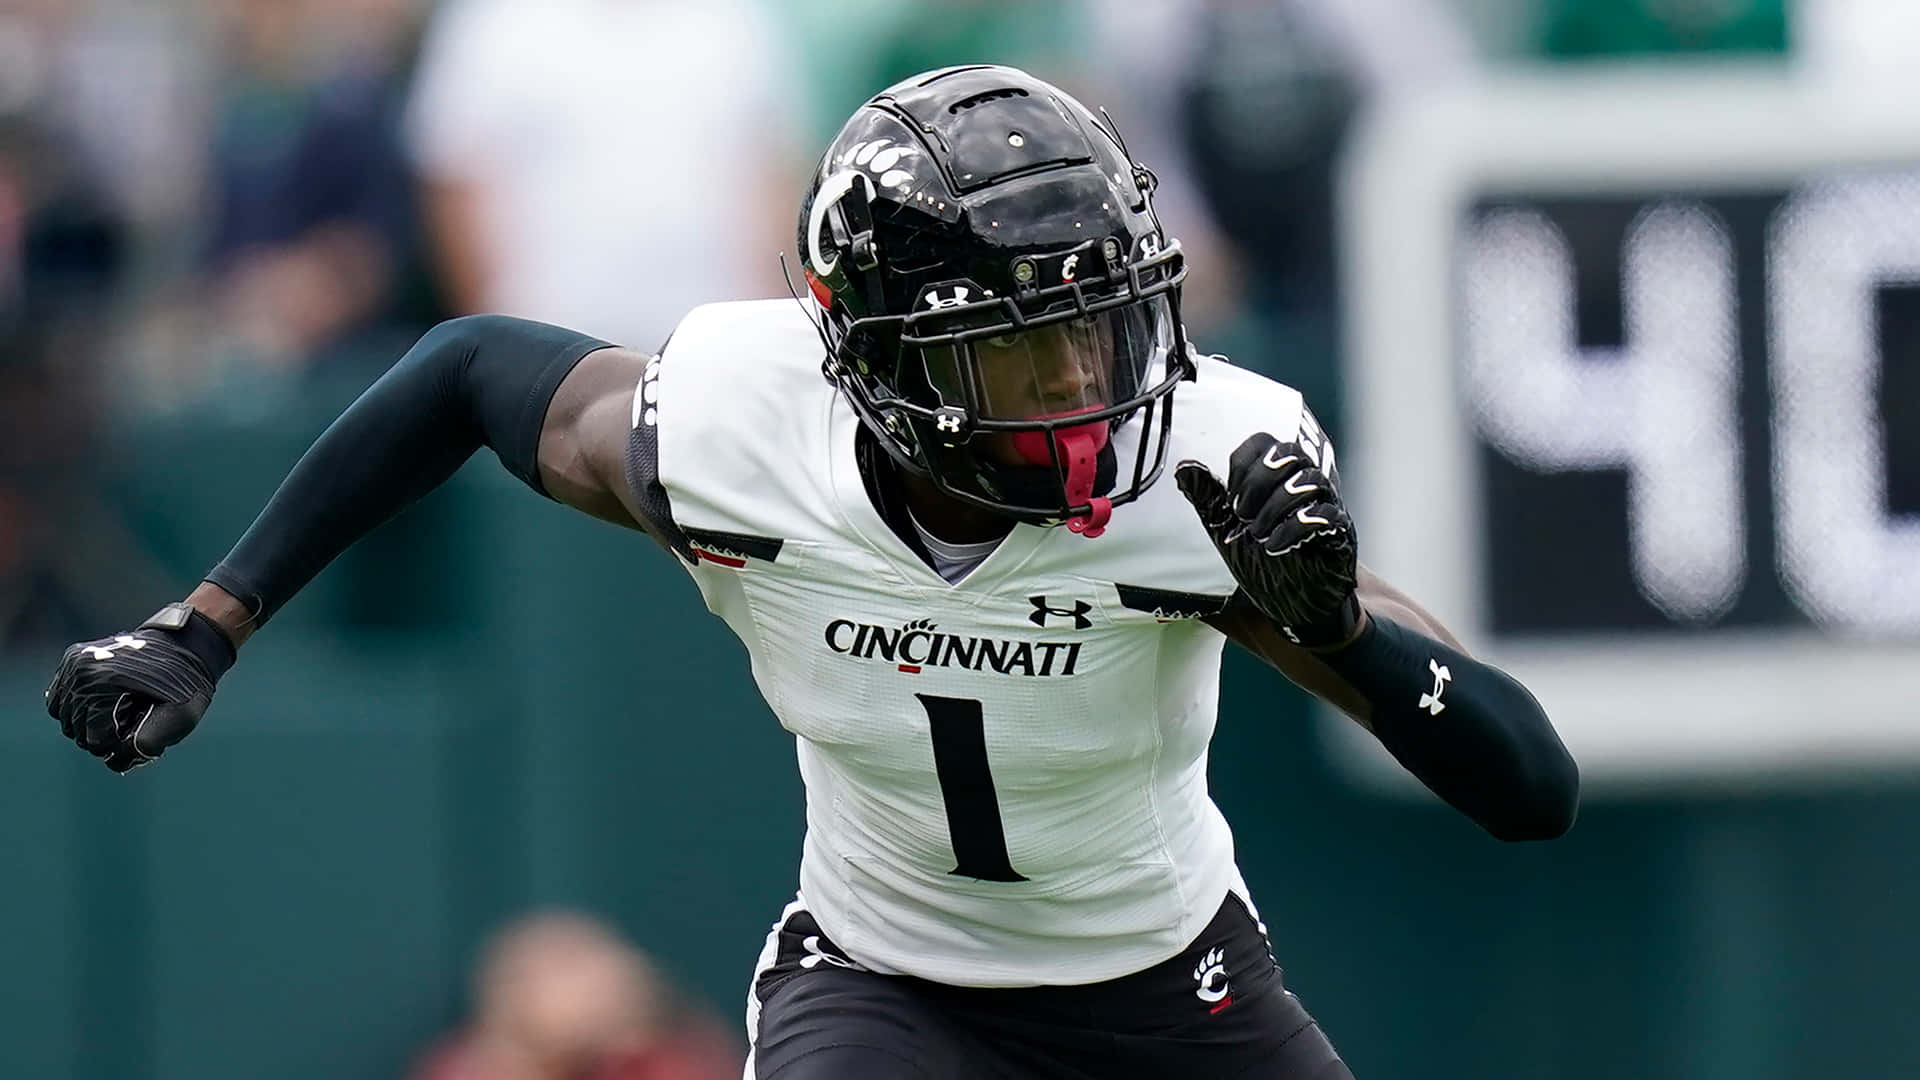 Ahmad Gardner in action during a College Football game for Cincinnati Wallpaper